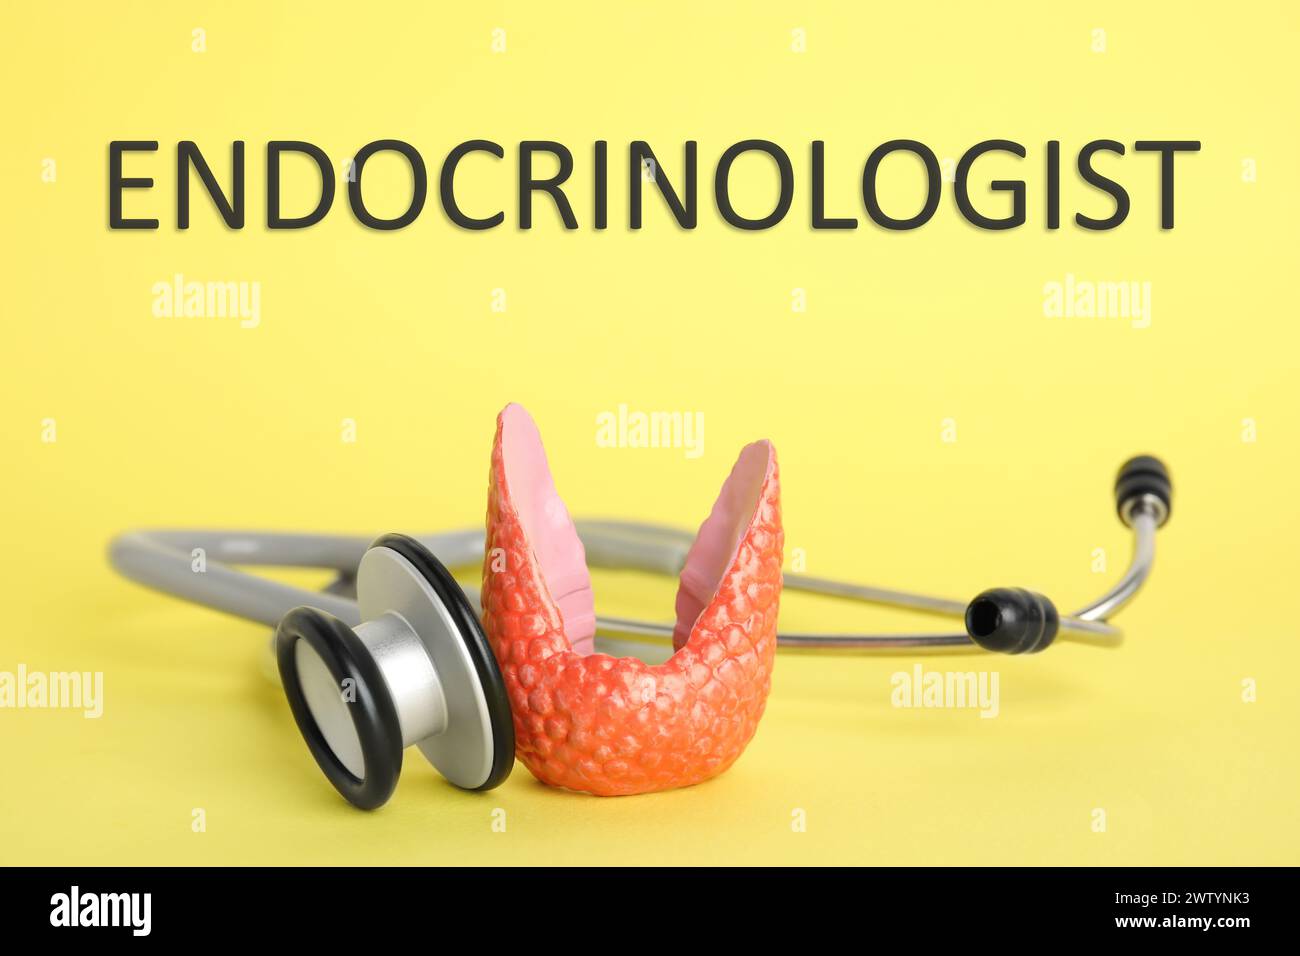 Endocrinologist. Model of thyroid gland and stethoscope on yellow background, closeup Stock Photo